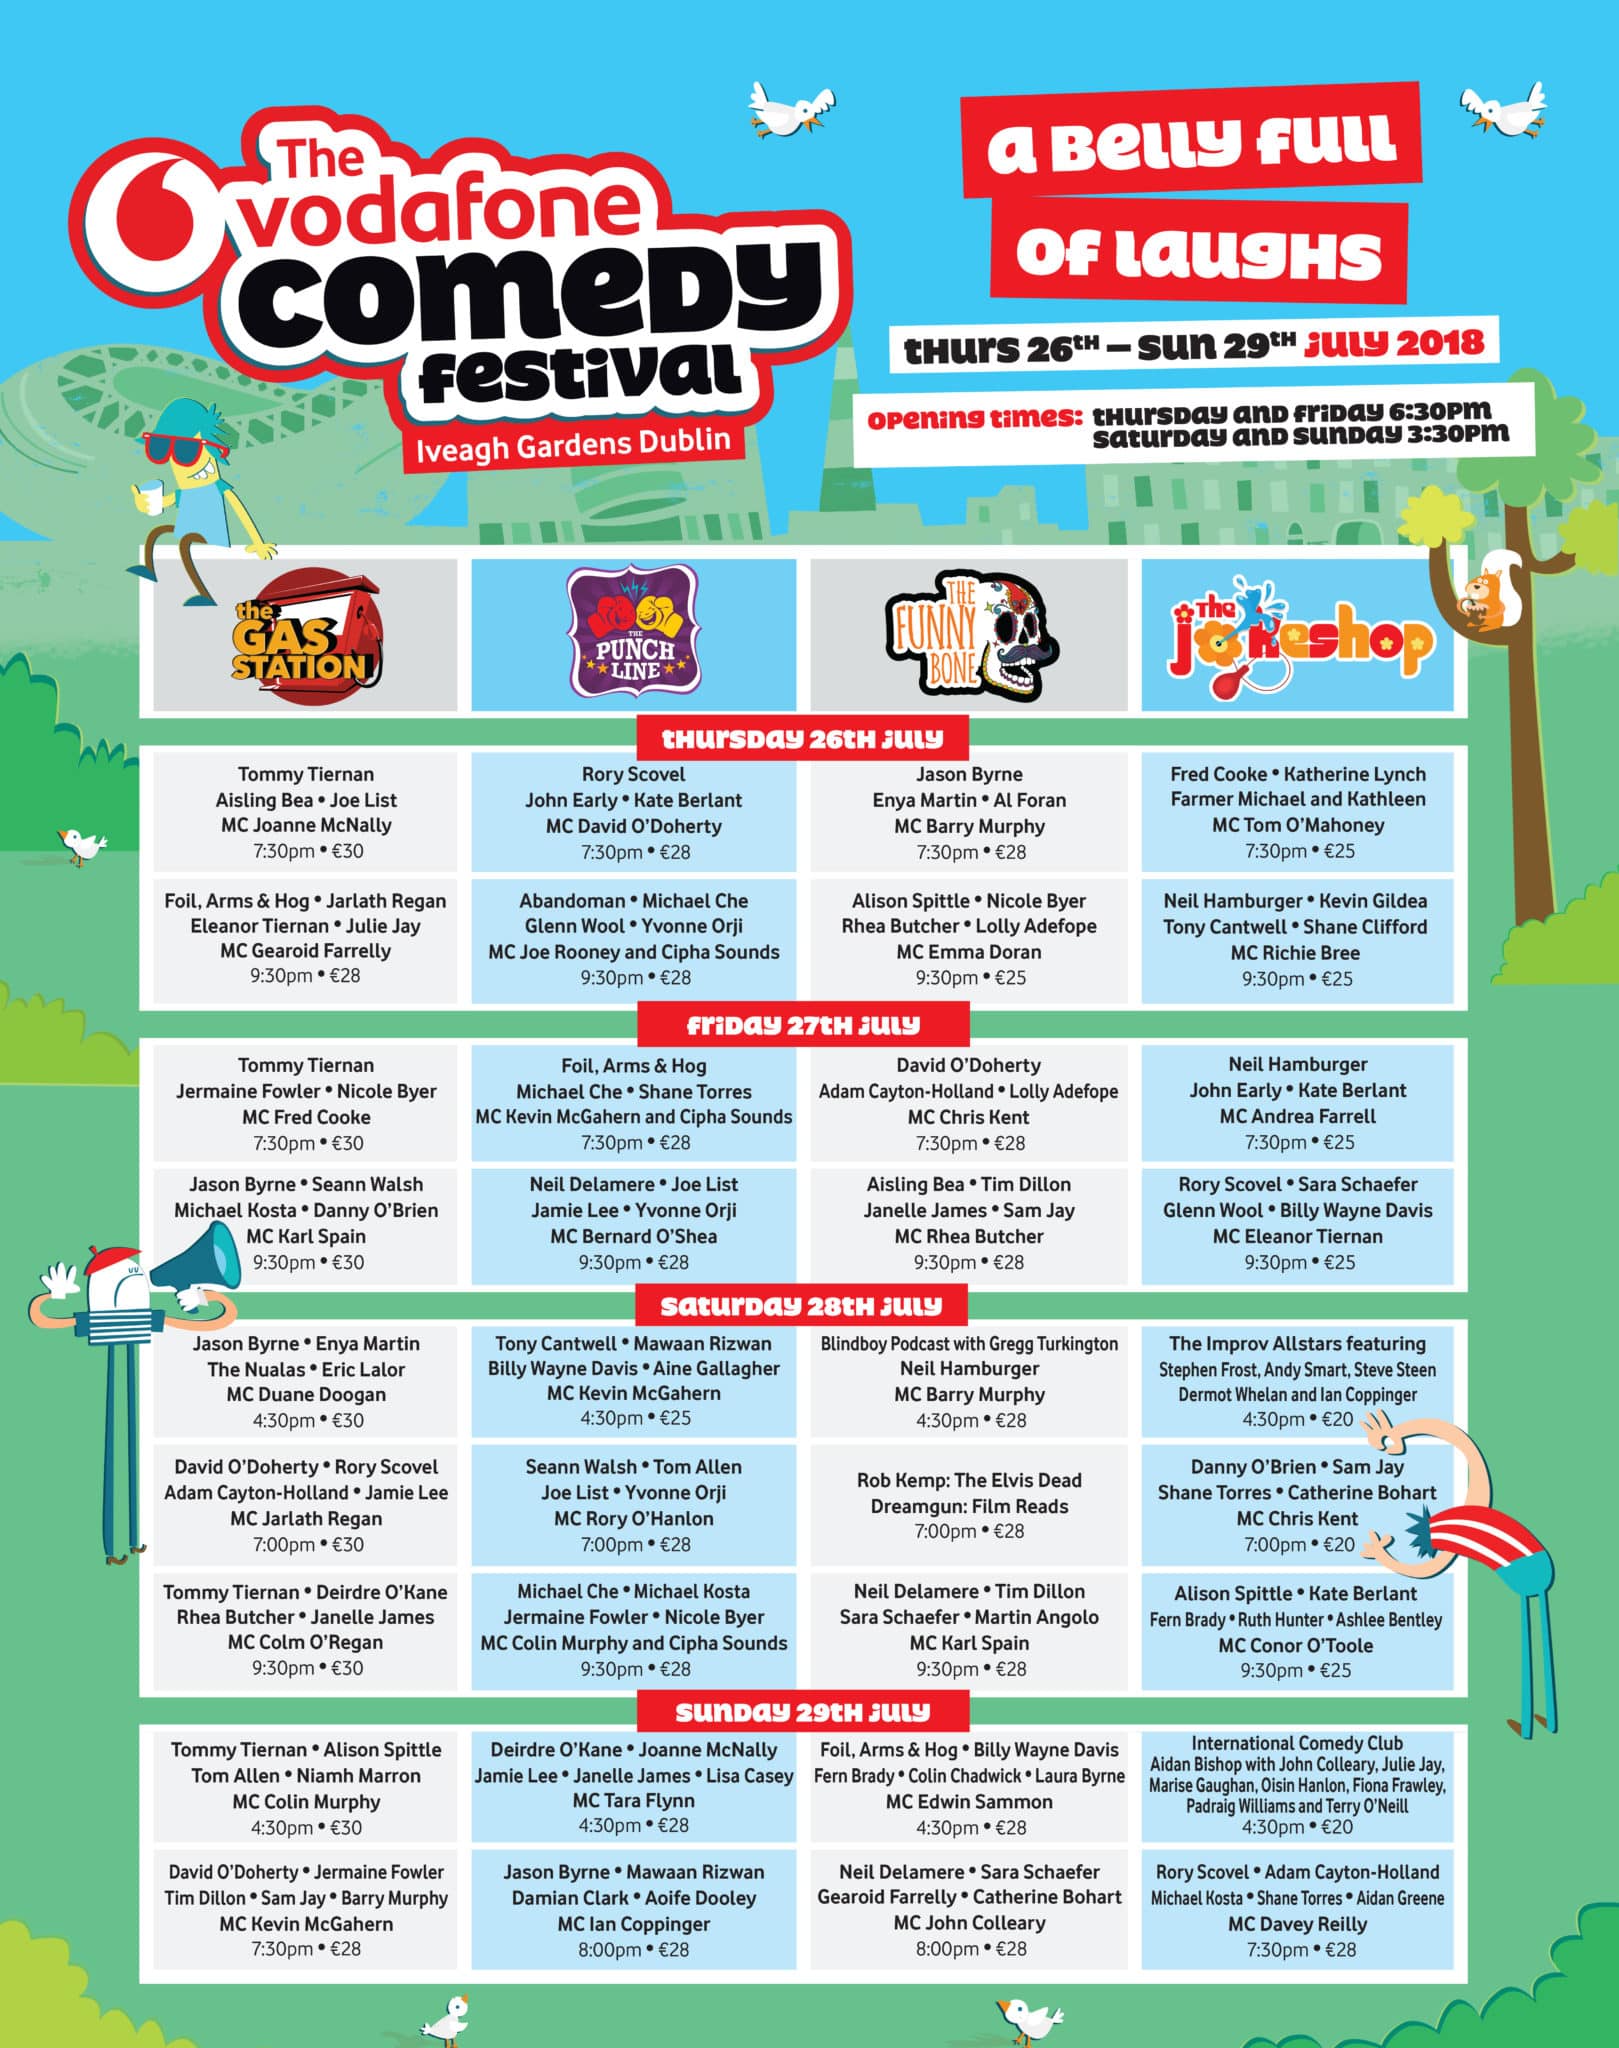 Vodafone Comedy Festival reveals biggest lineup yet Ticketmaster IE Blog